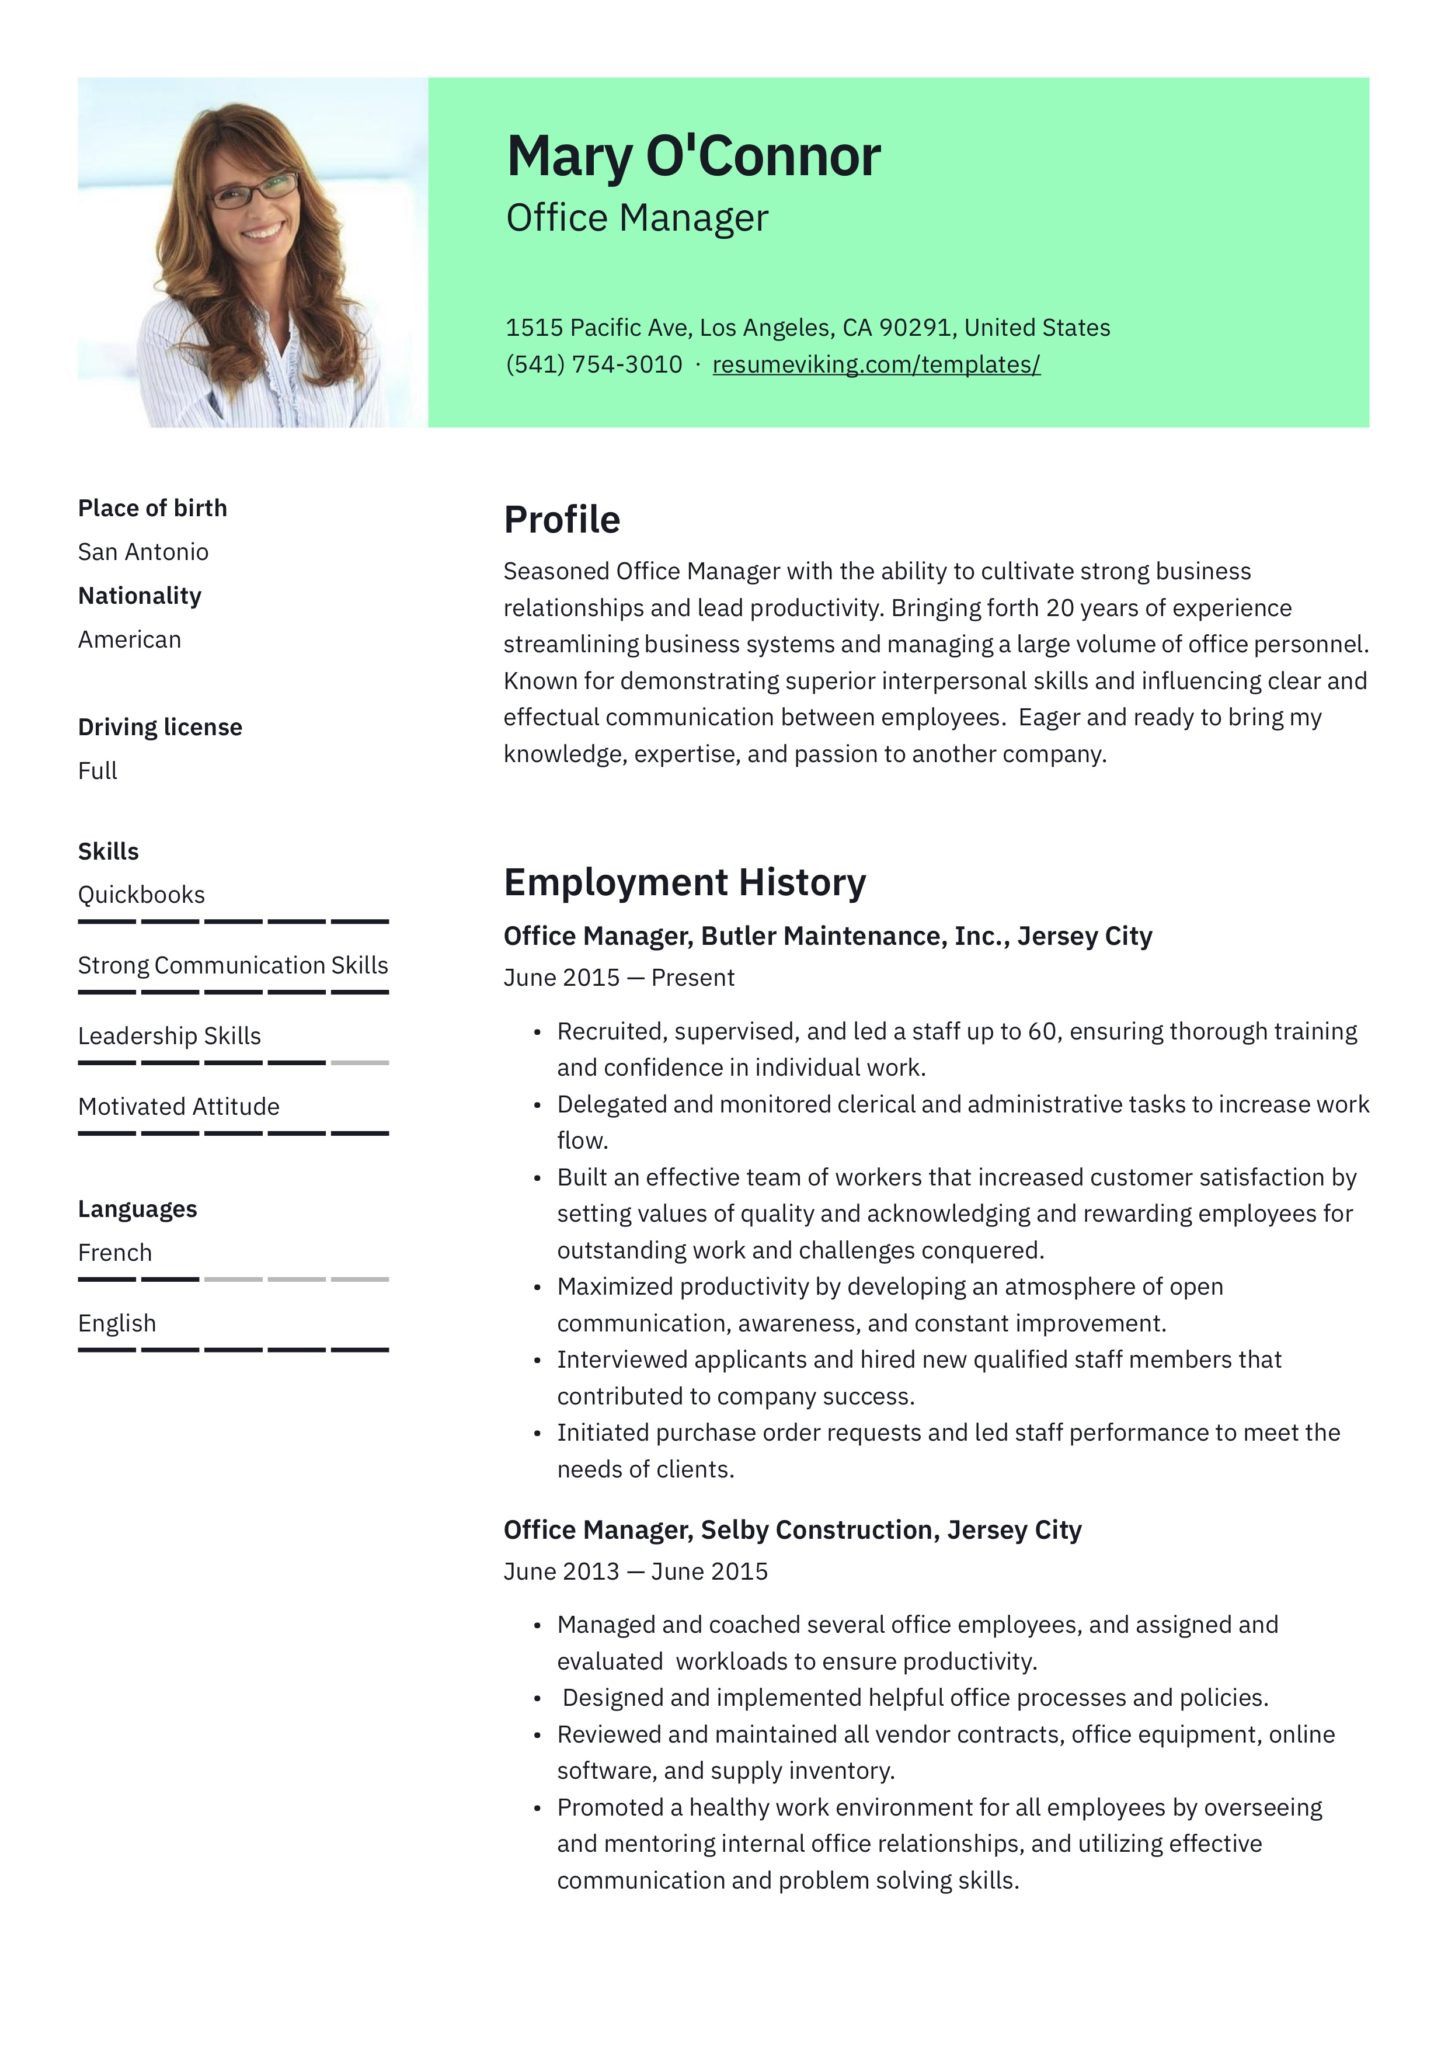 Sample Resume for Office Manager Position Fice Manager Resume & Guide 12 Samples Pdf